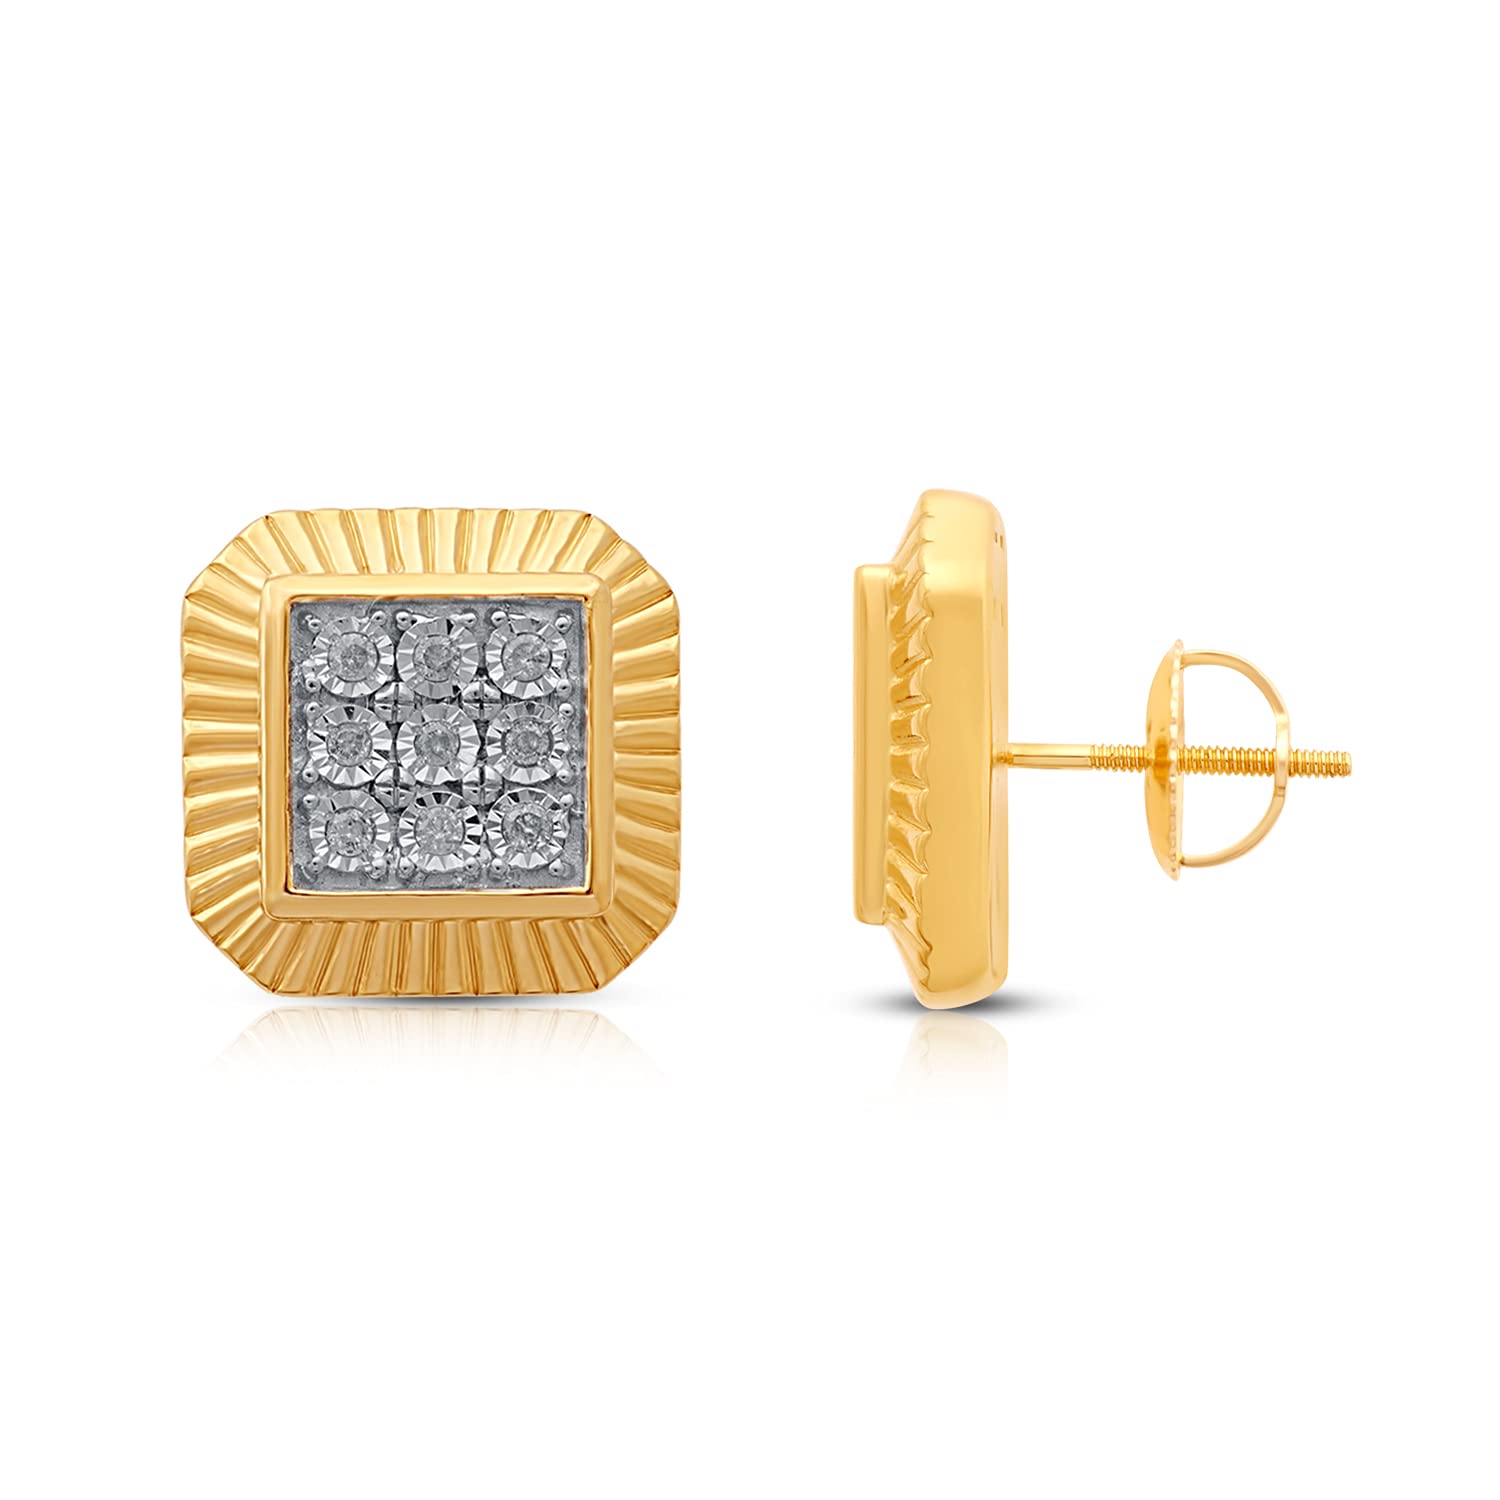 Senco Gold 18KT White Gold and Diamond Stud Earrings for Women : Amazon.in:  Fashion